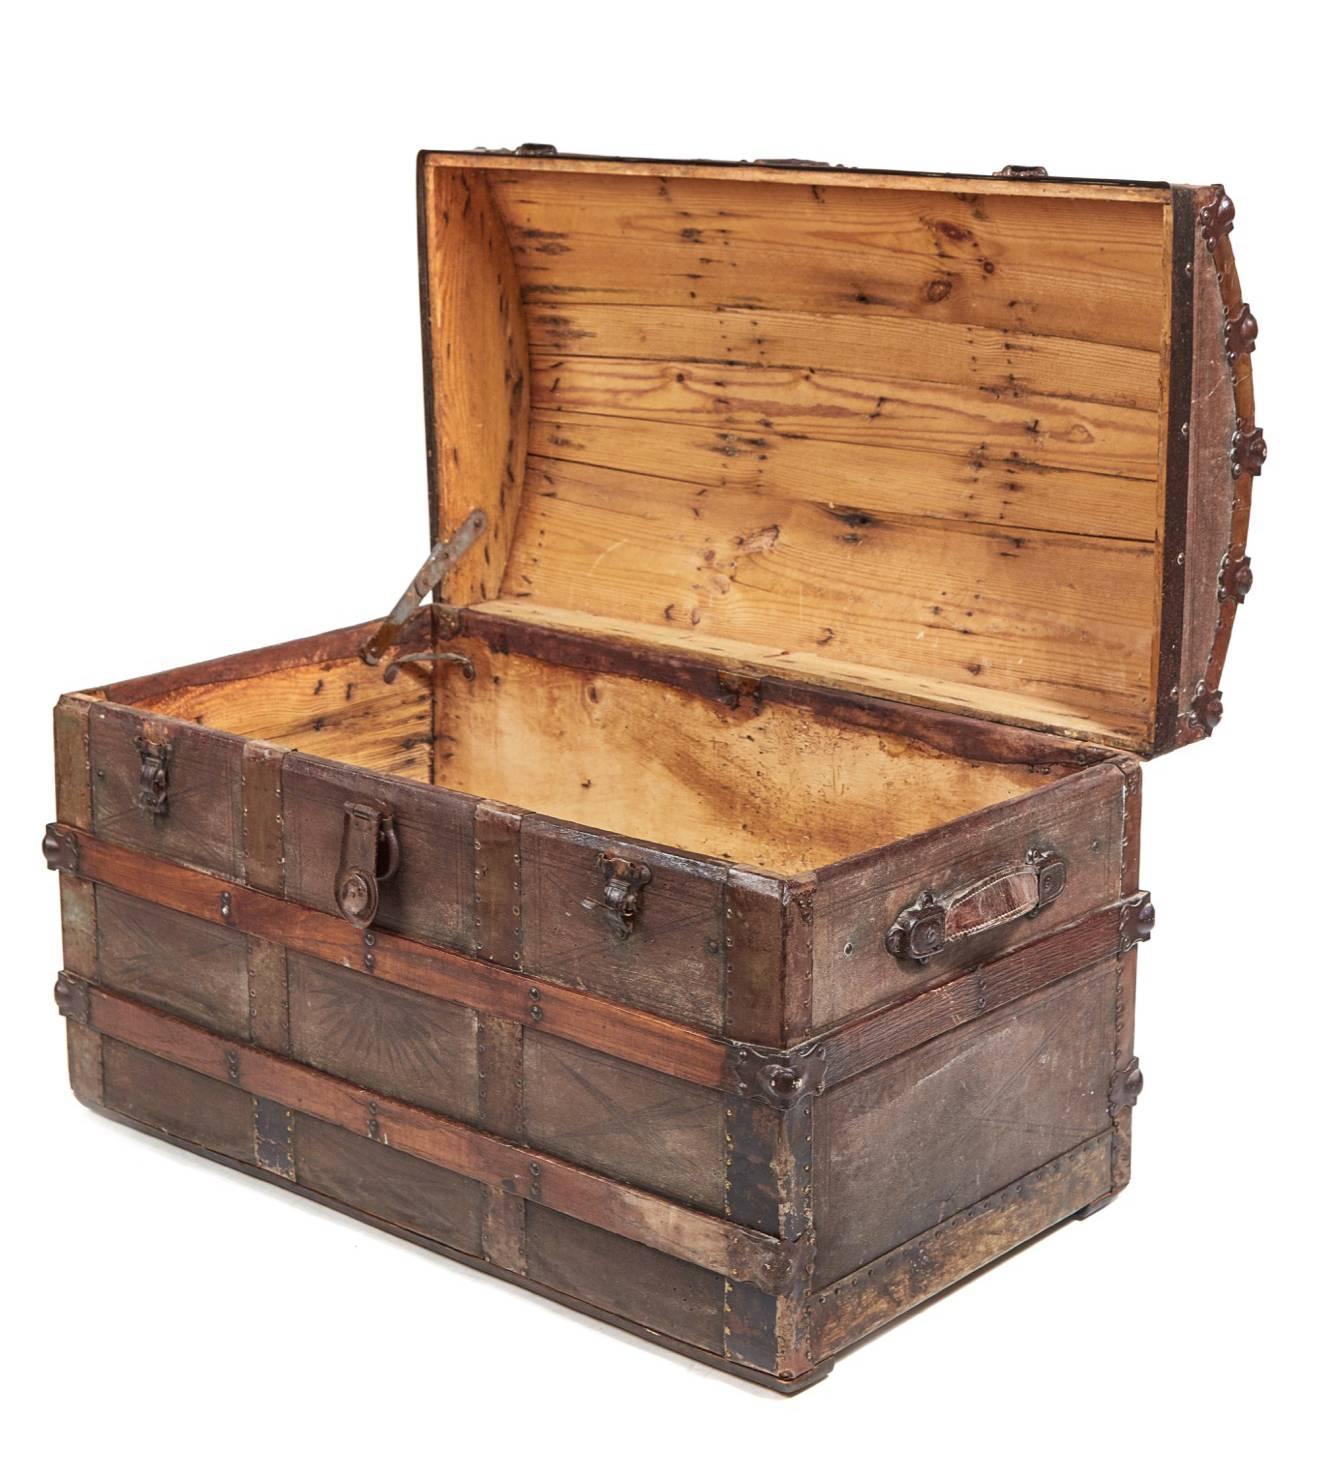 Unusual Victorian dome topped trunk with original leather handles fitted interior, the dome top has curved wooden strips running from side to side with metal and leather panels, the front sides and back have wooden strips with metal and leather